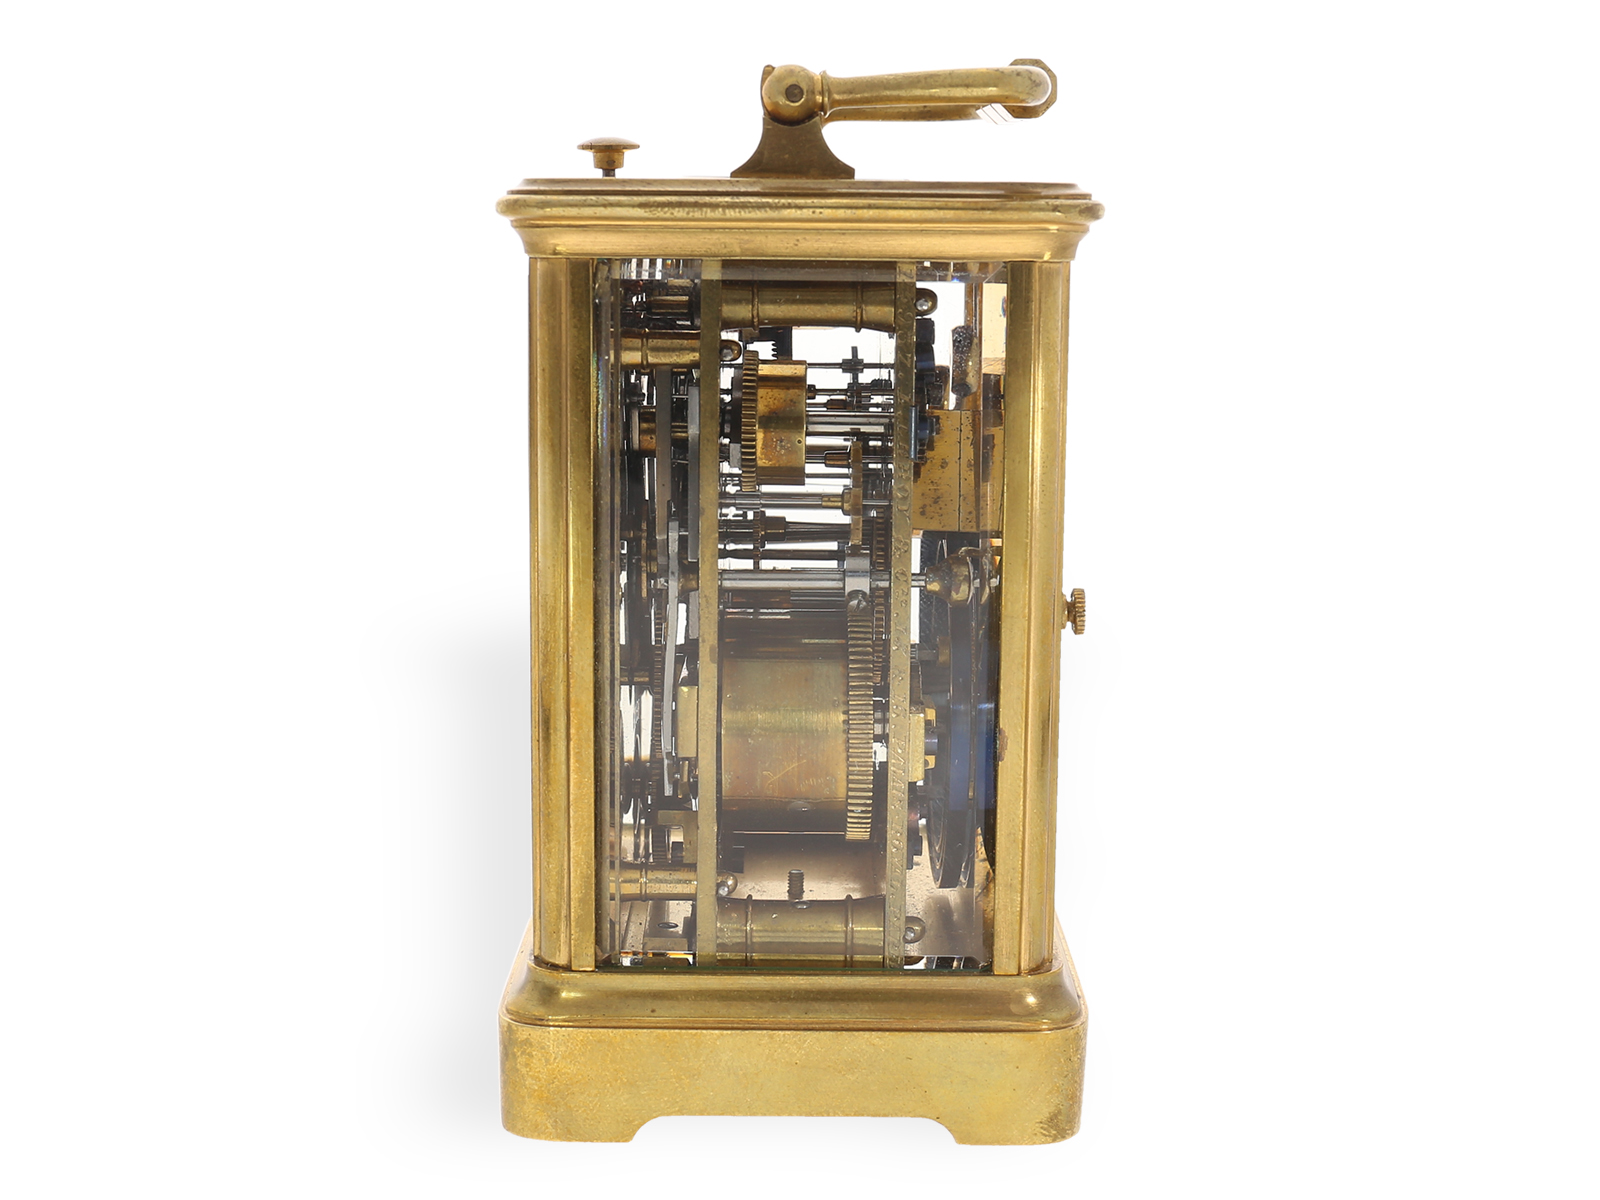 Exquisite, complicated travel clock with grande sonnerie, repeater and alarm, Leroy Paris, ca. 1900 - Image 2 of 5